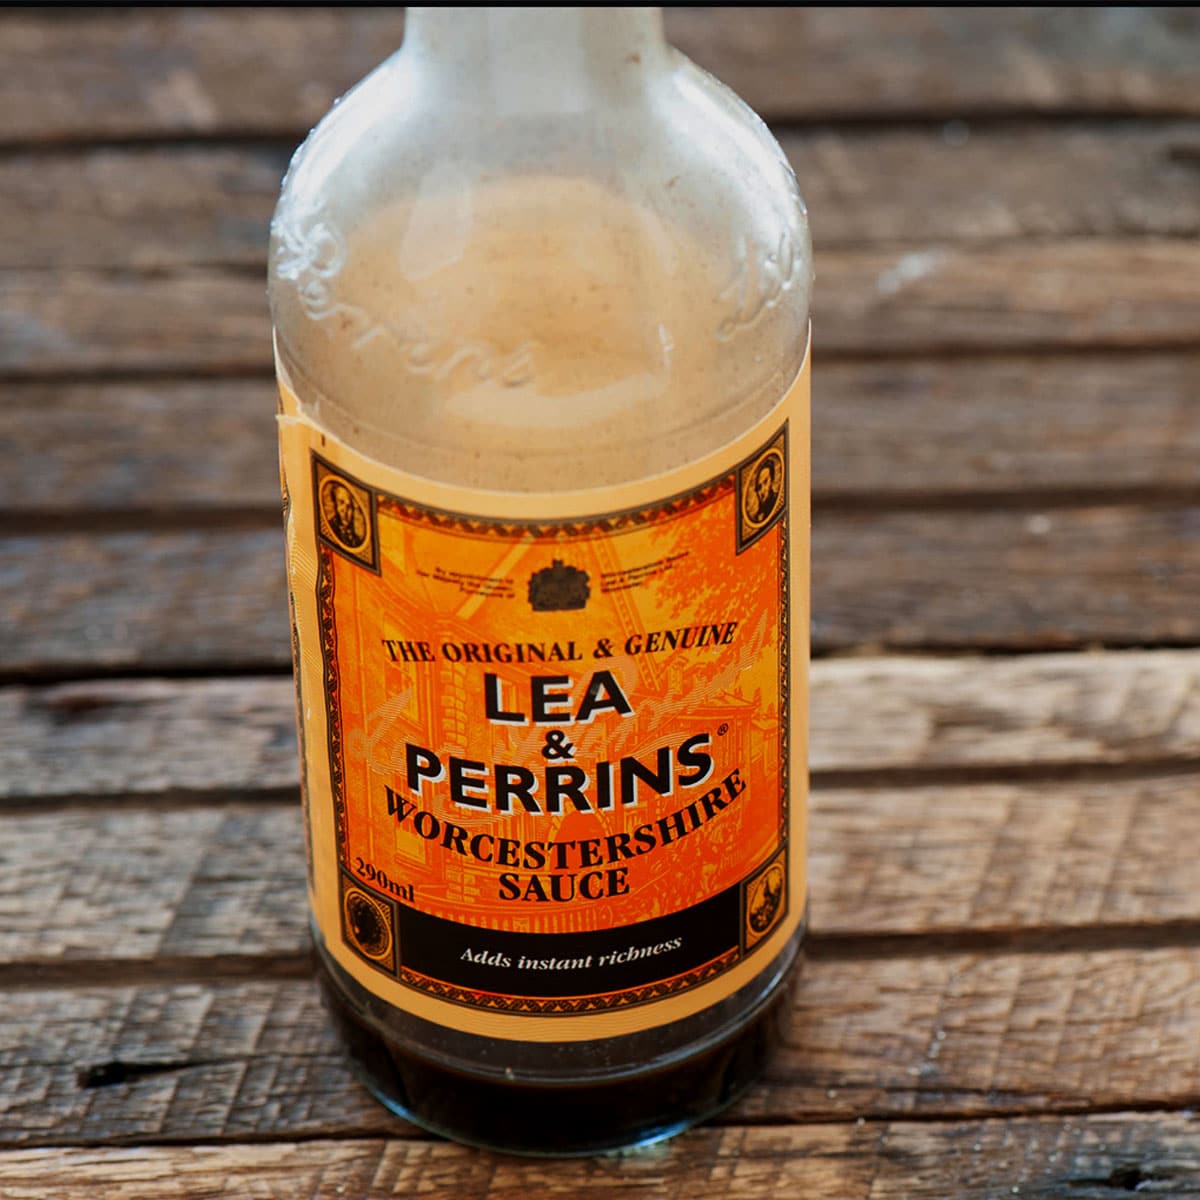 If you do something silly with Worcestershire sauce, such as leaving an open bottle adjacent to a heat source, it can go off. You can keep an unopened bottle well past its "best before" date by several years.